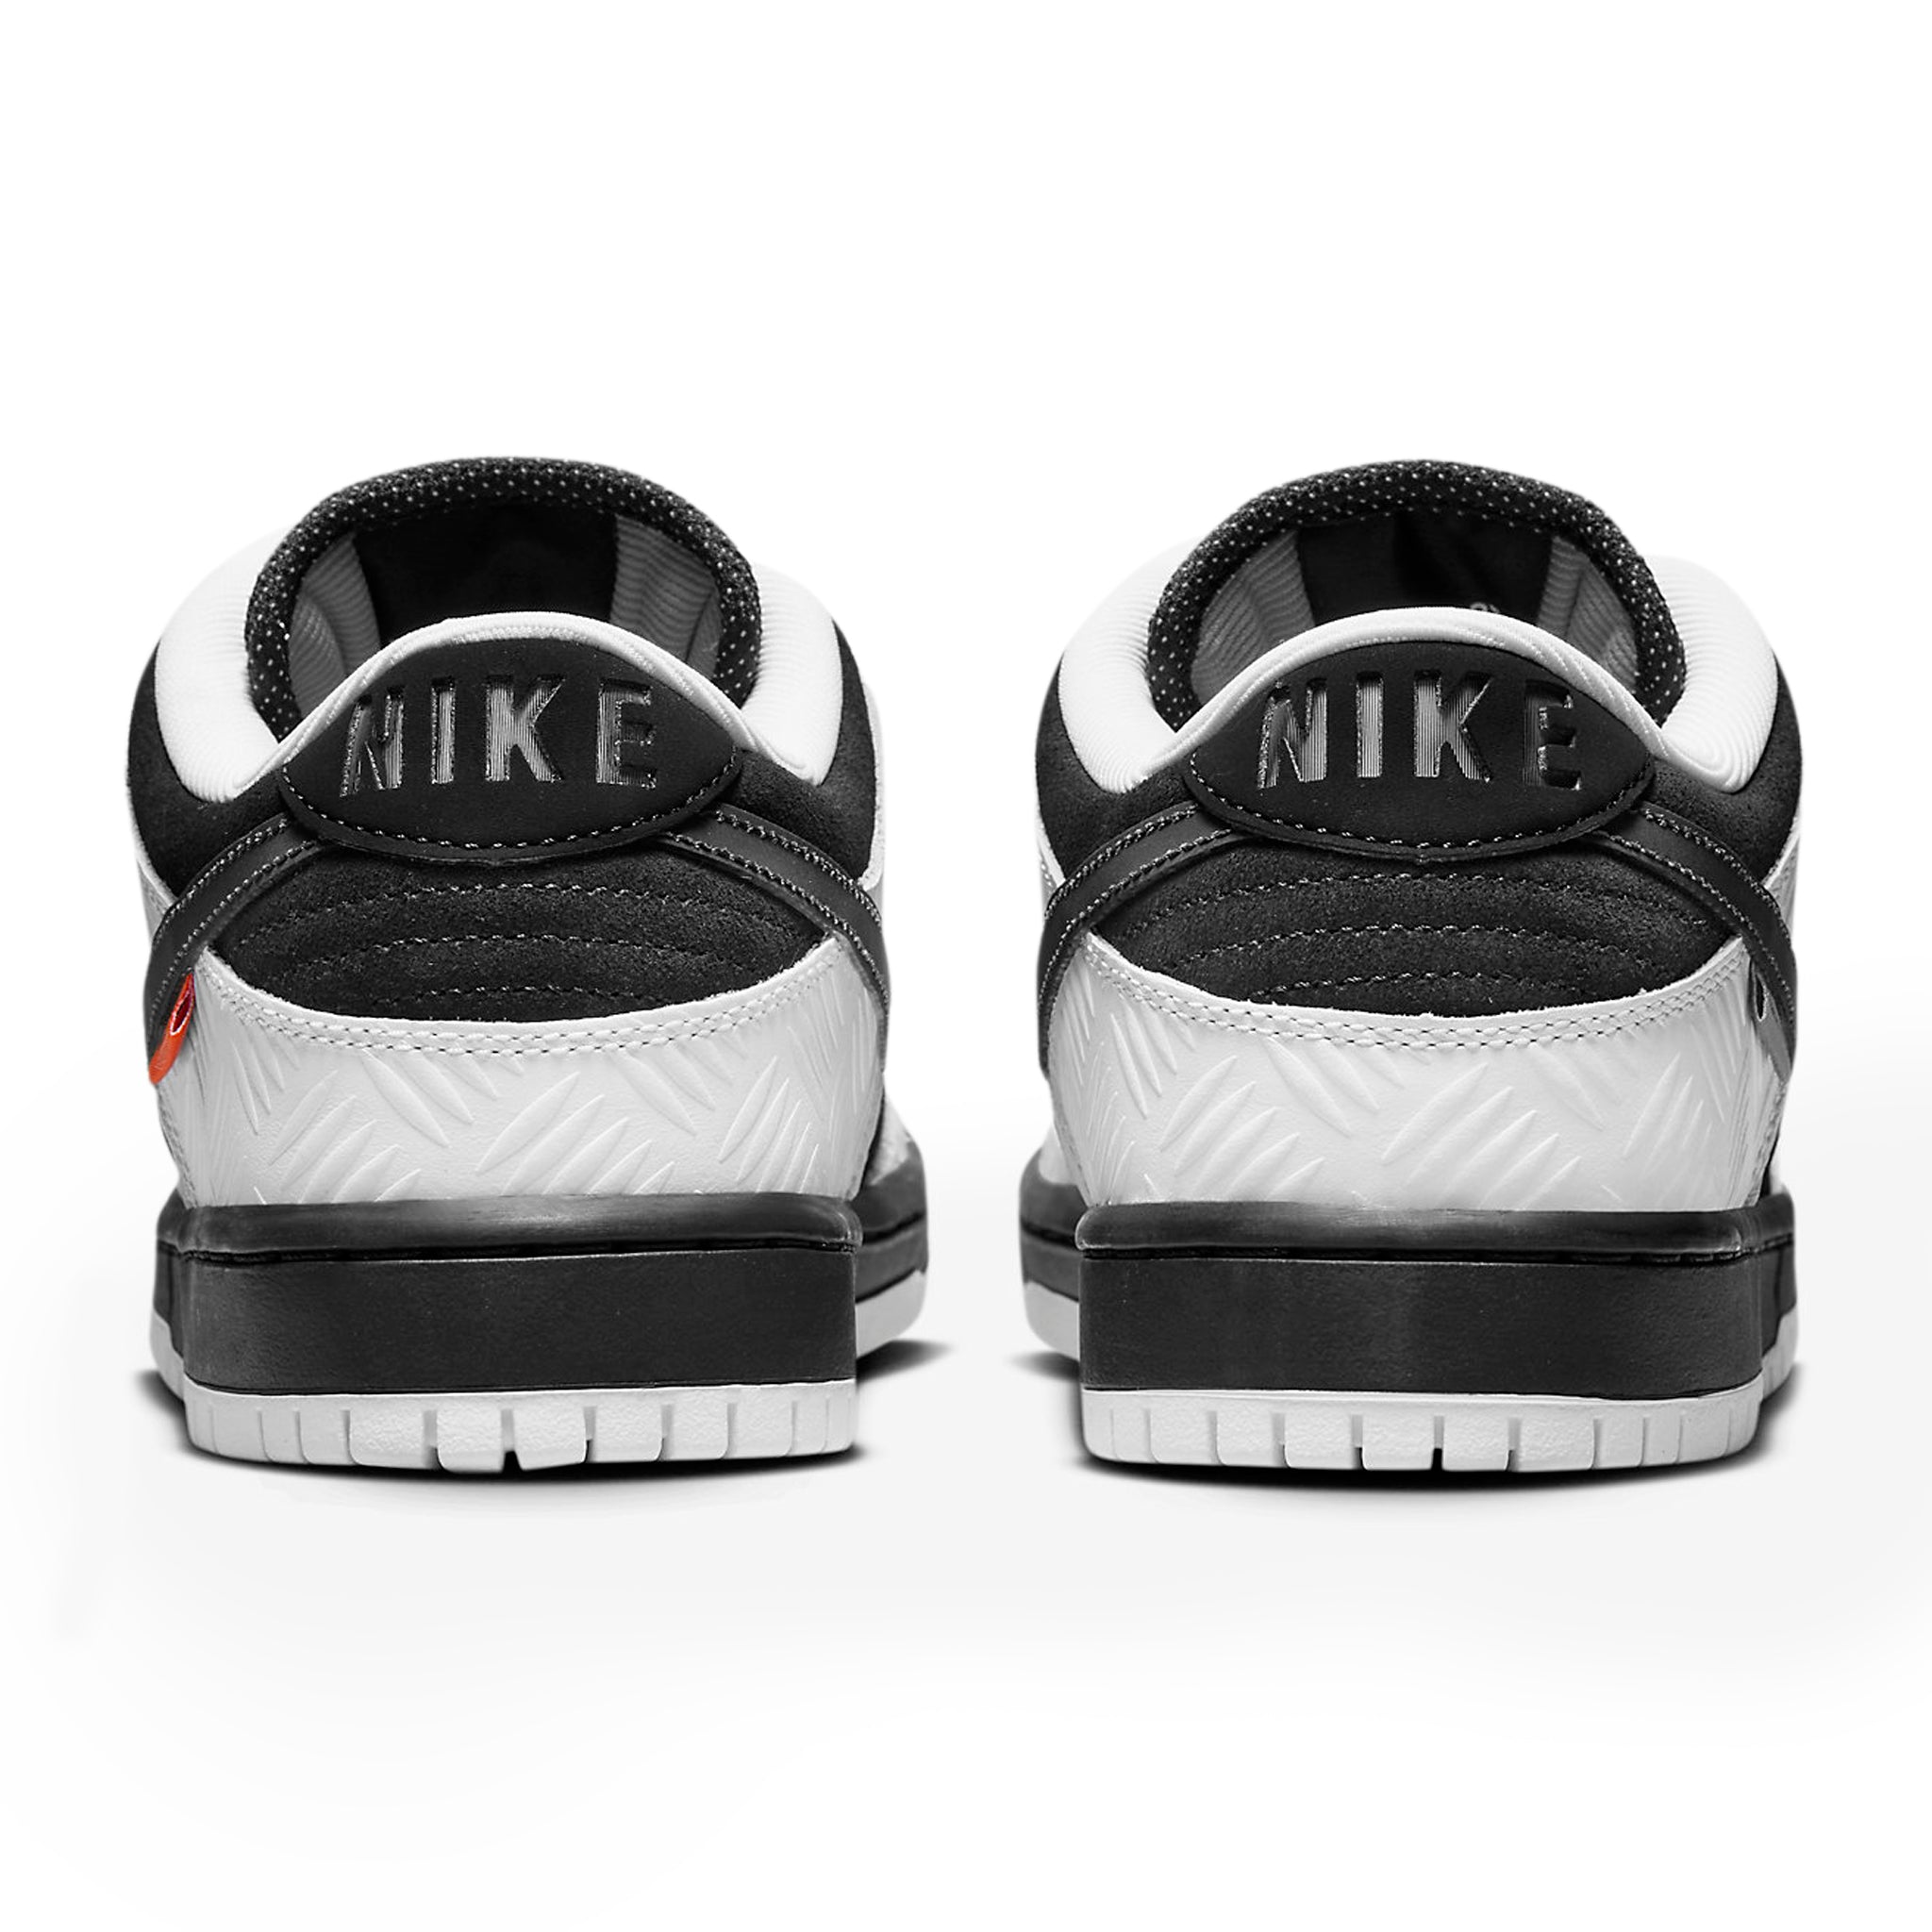 Back view of Tightbooth X Nike SB Dunk Low Black White FD2629-100